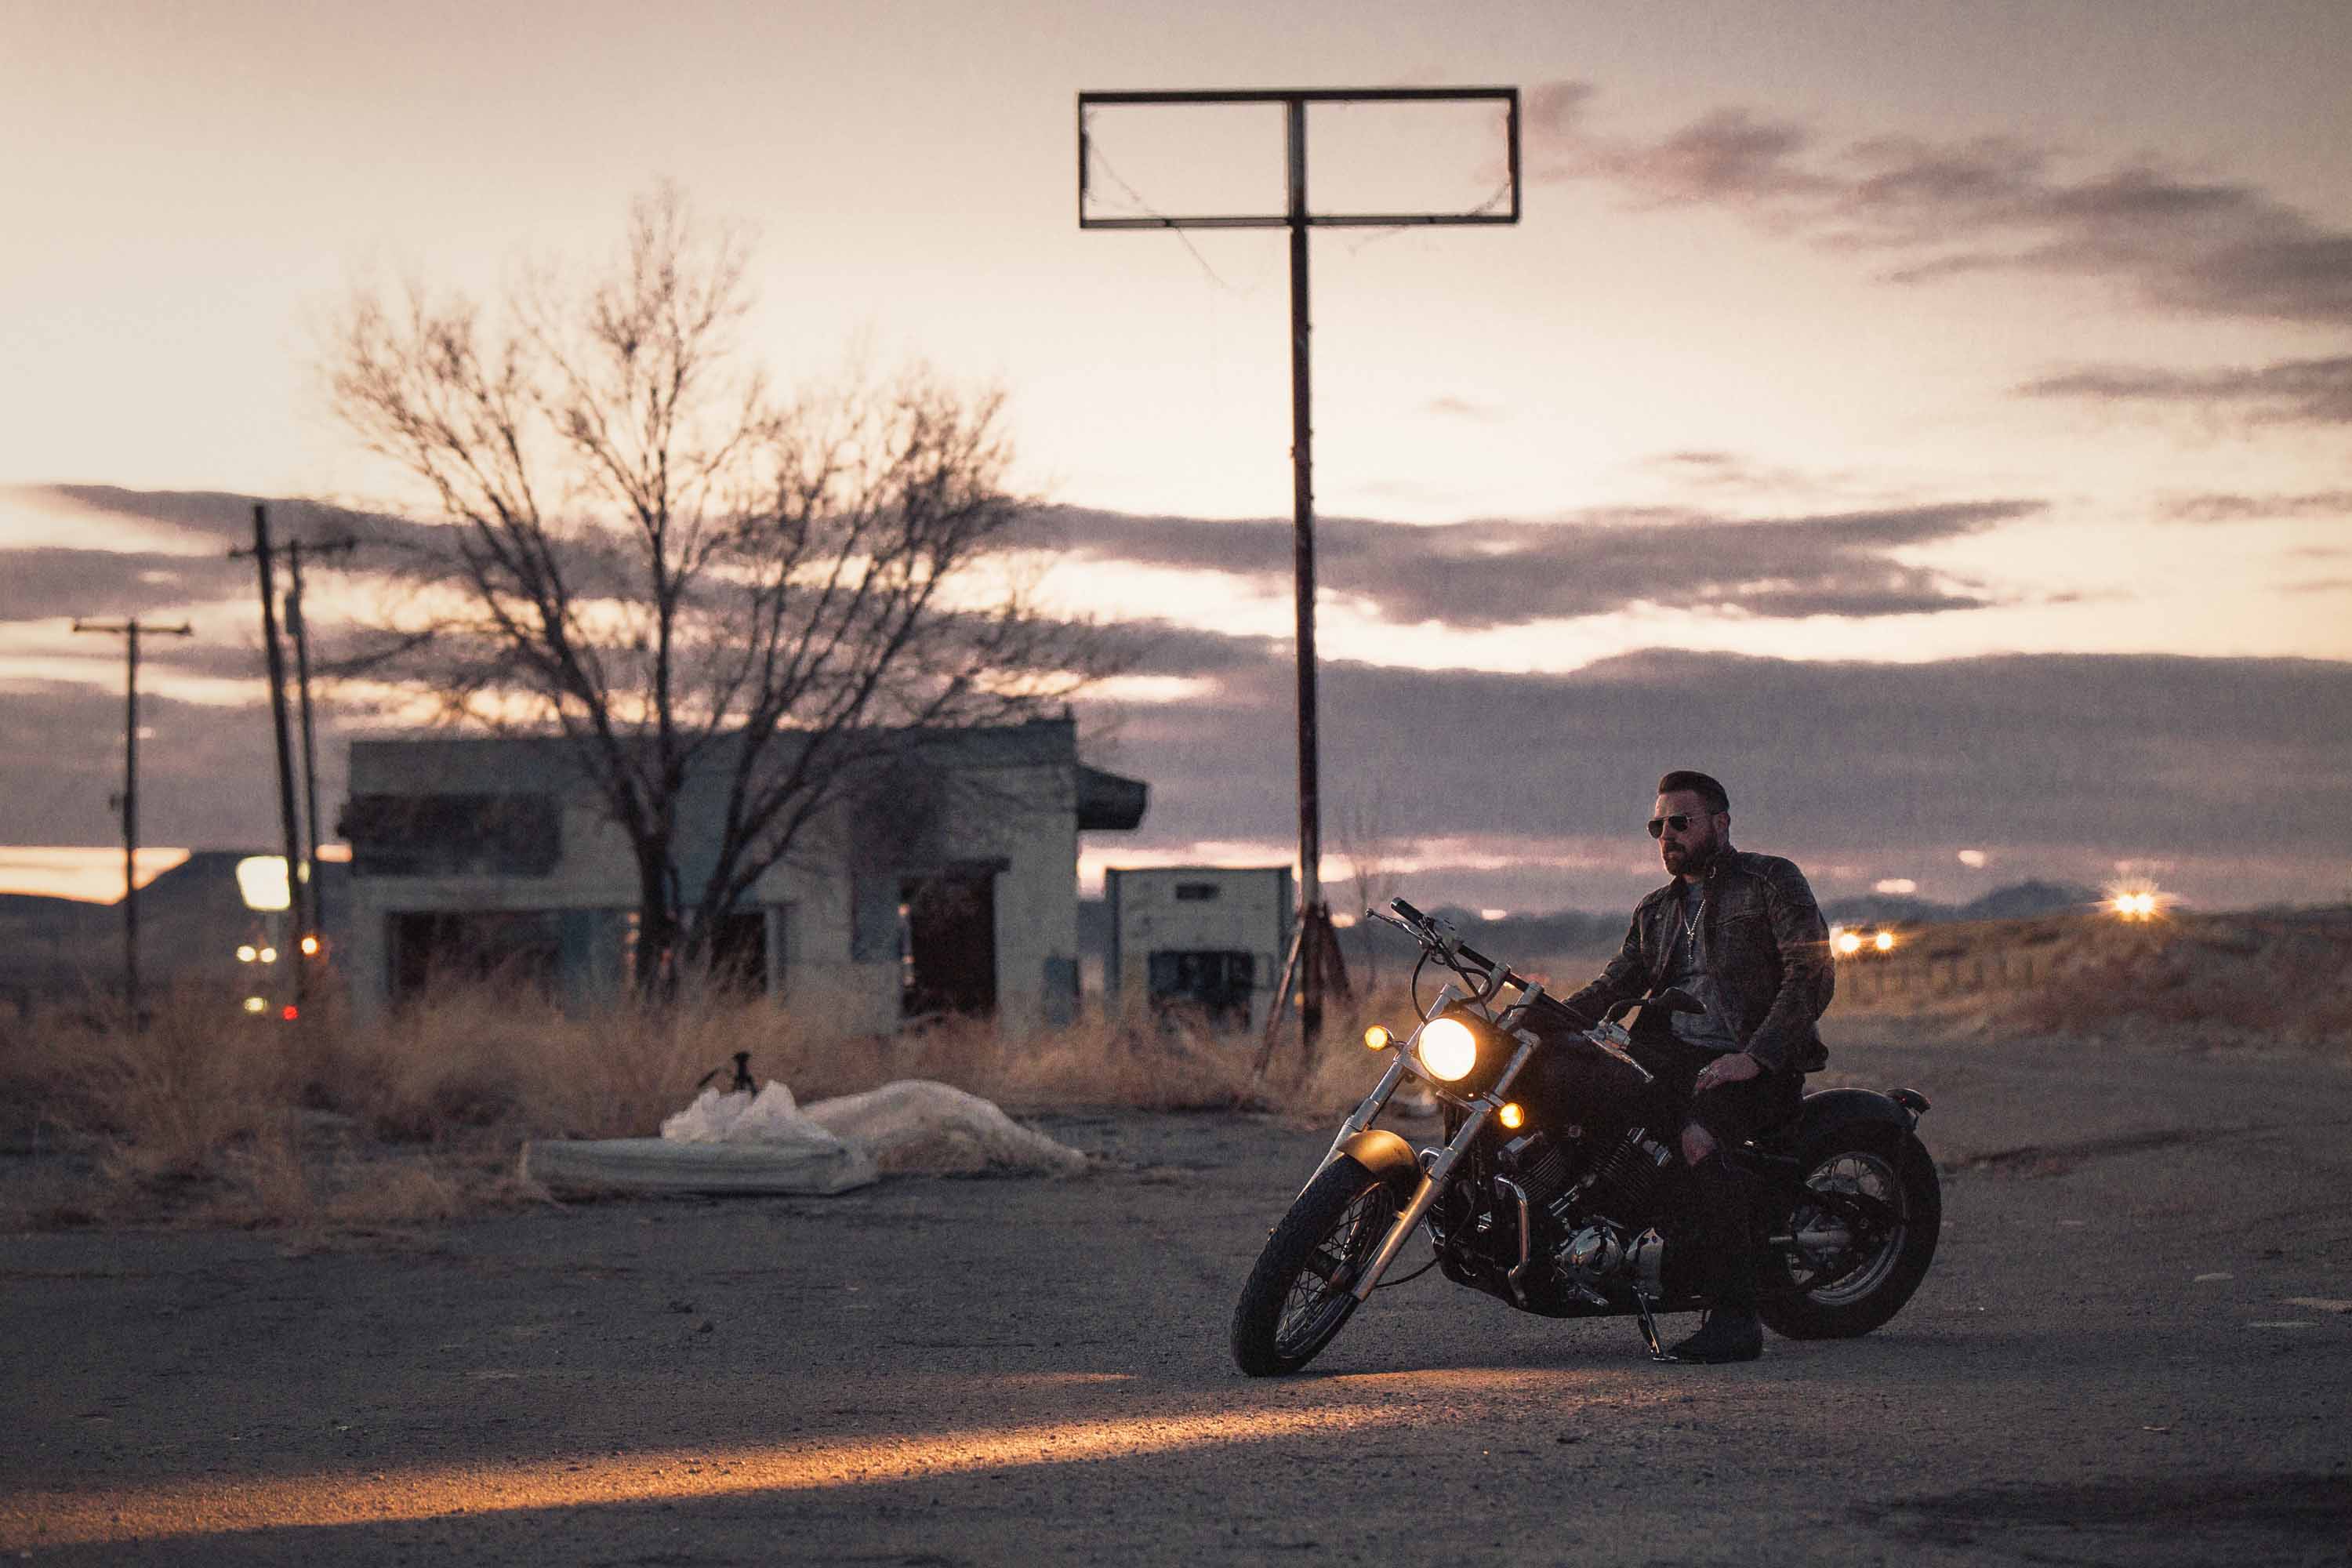 A man on a motorcycle at dusk